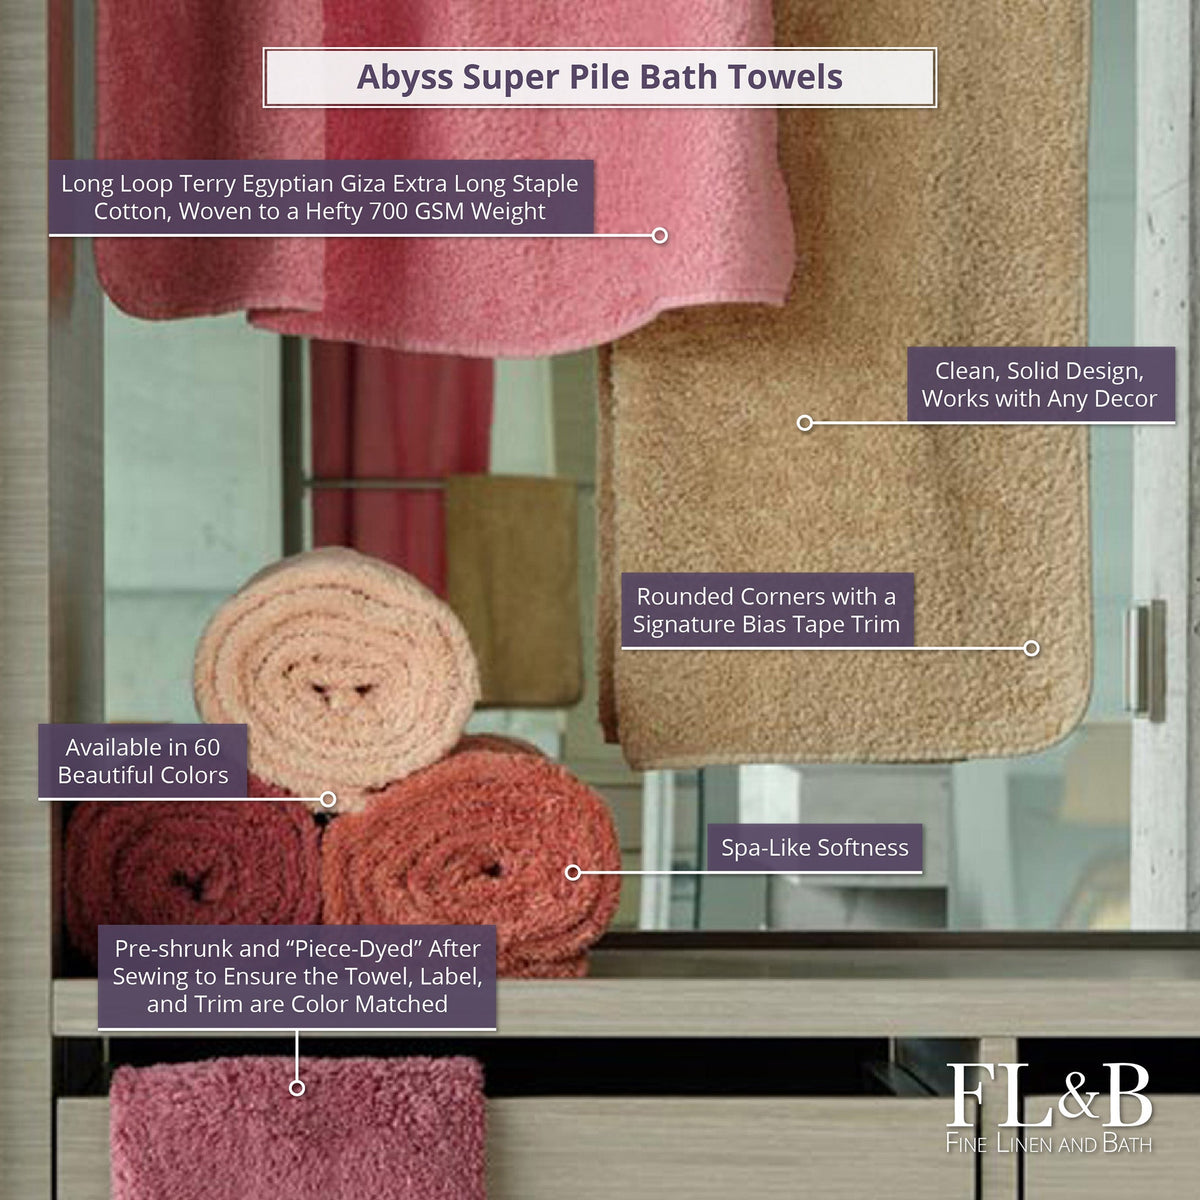 Rolls and Hanging Abyss Super Pile Bath Towels of Different Colors with Descriptive Labels